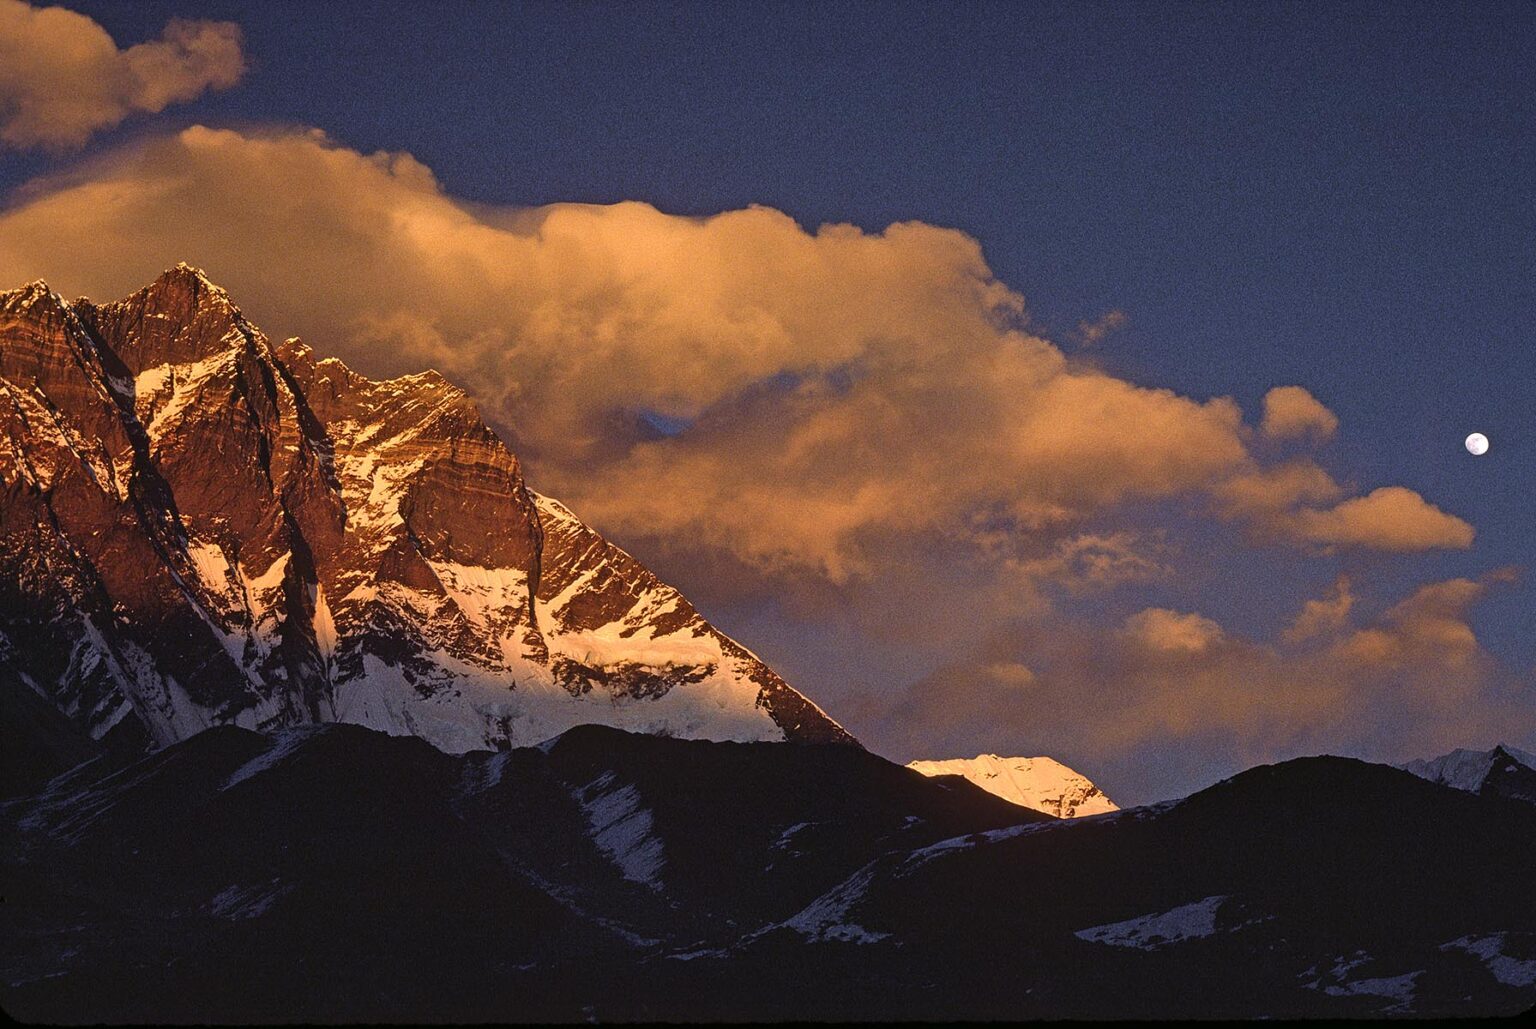 The sun sets on Lhotse which rises to 8501 Meters (28,005 feet) and is one of the worlds highest peaks - KHUMBU DISTRICT, NEPAL